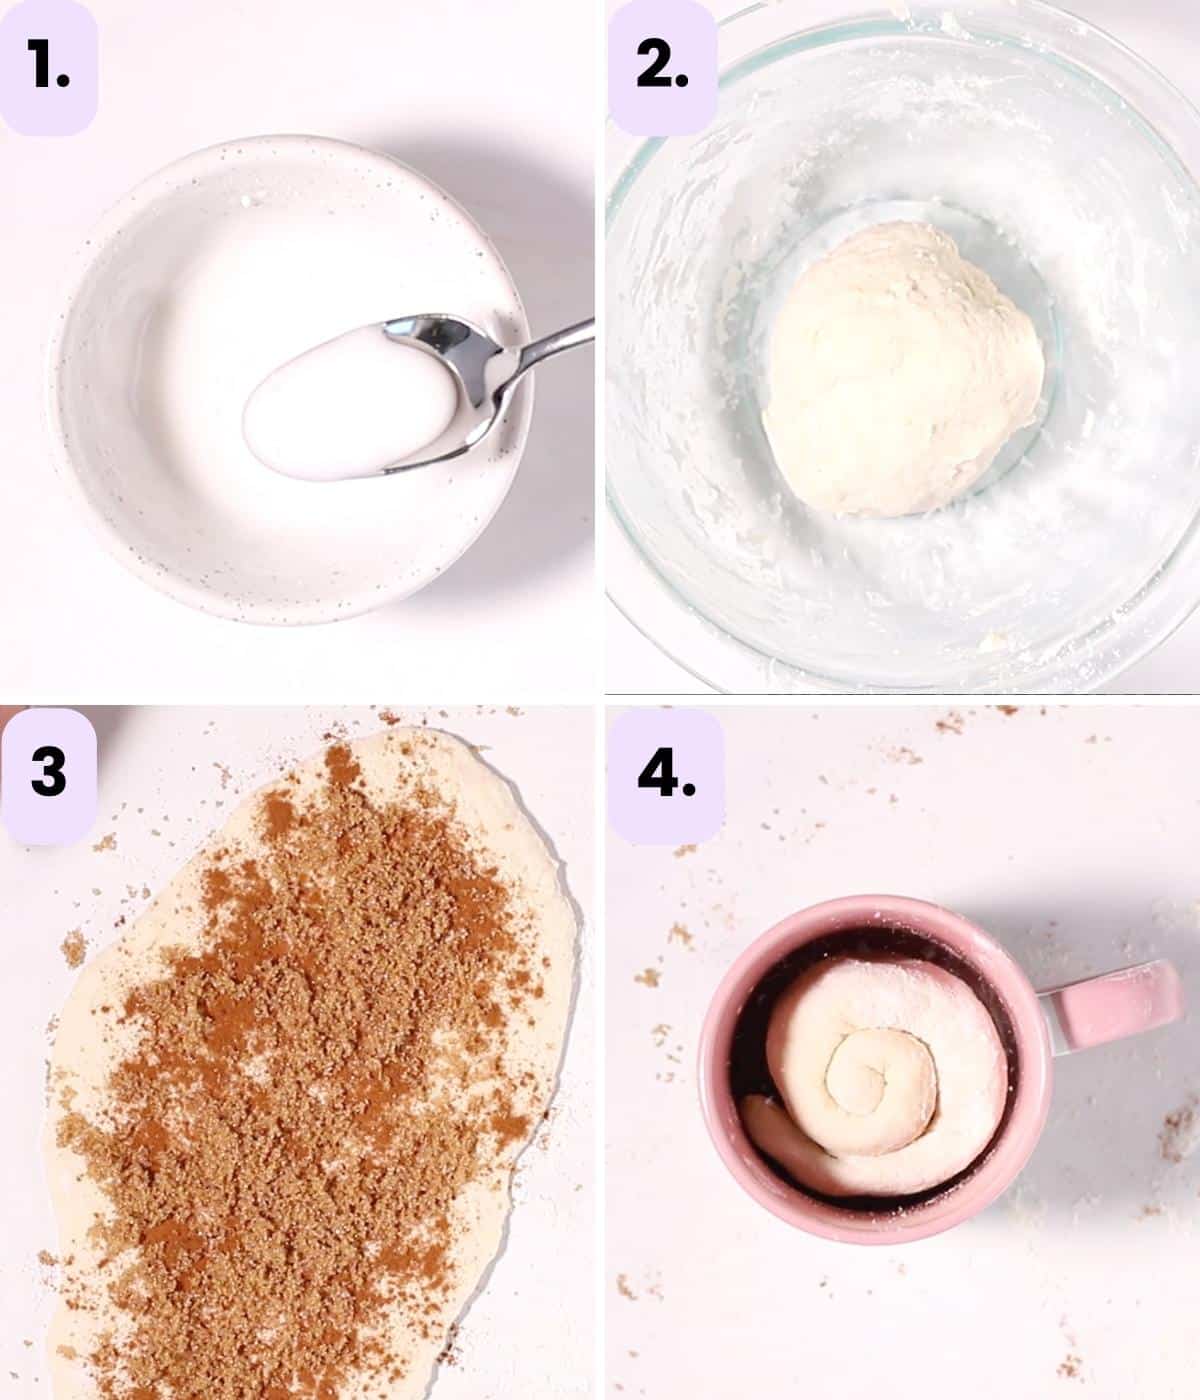 how to make a cinnamon roll in a mug step by step as per the written instructions